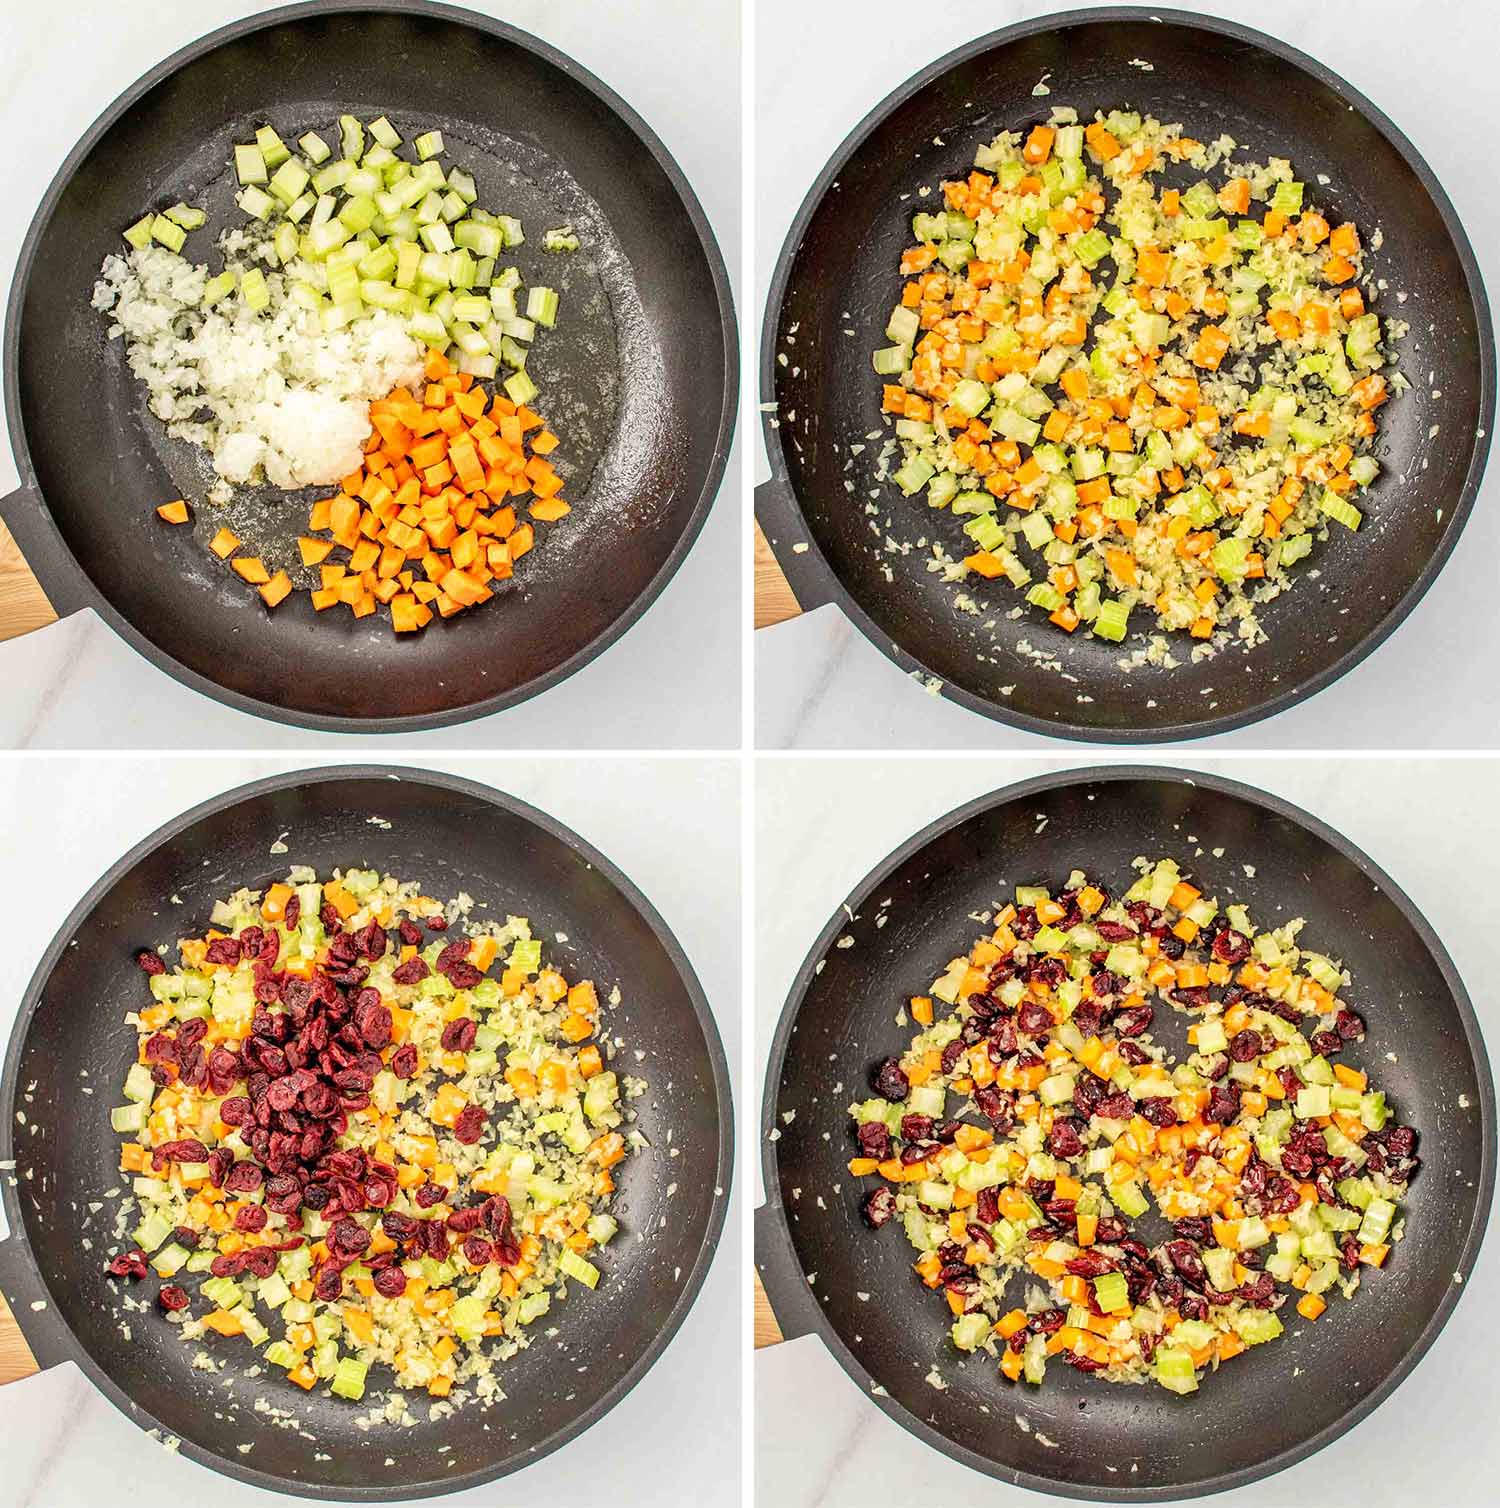 process shots showing how to make wild rice pilaf.